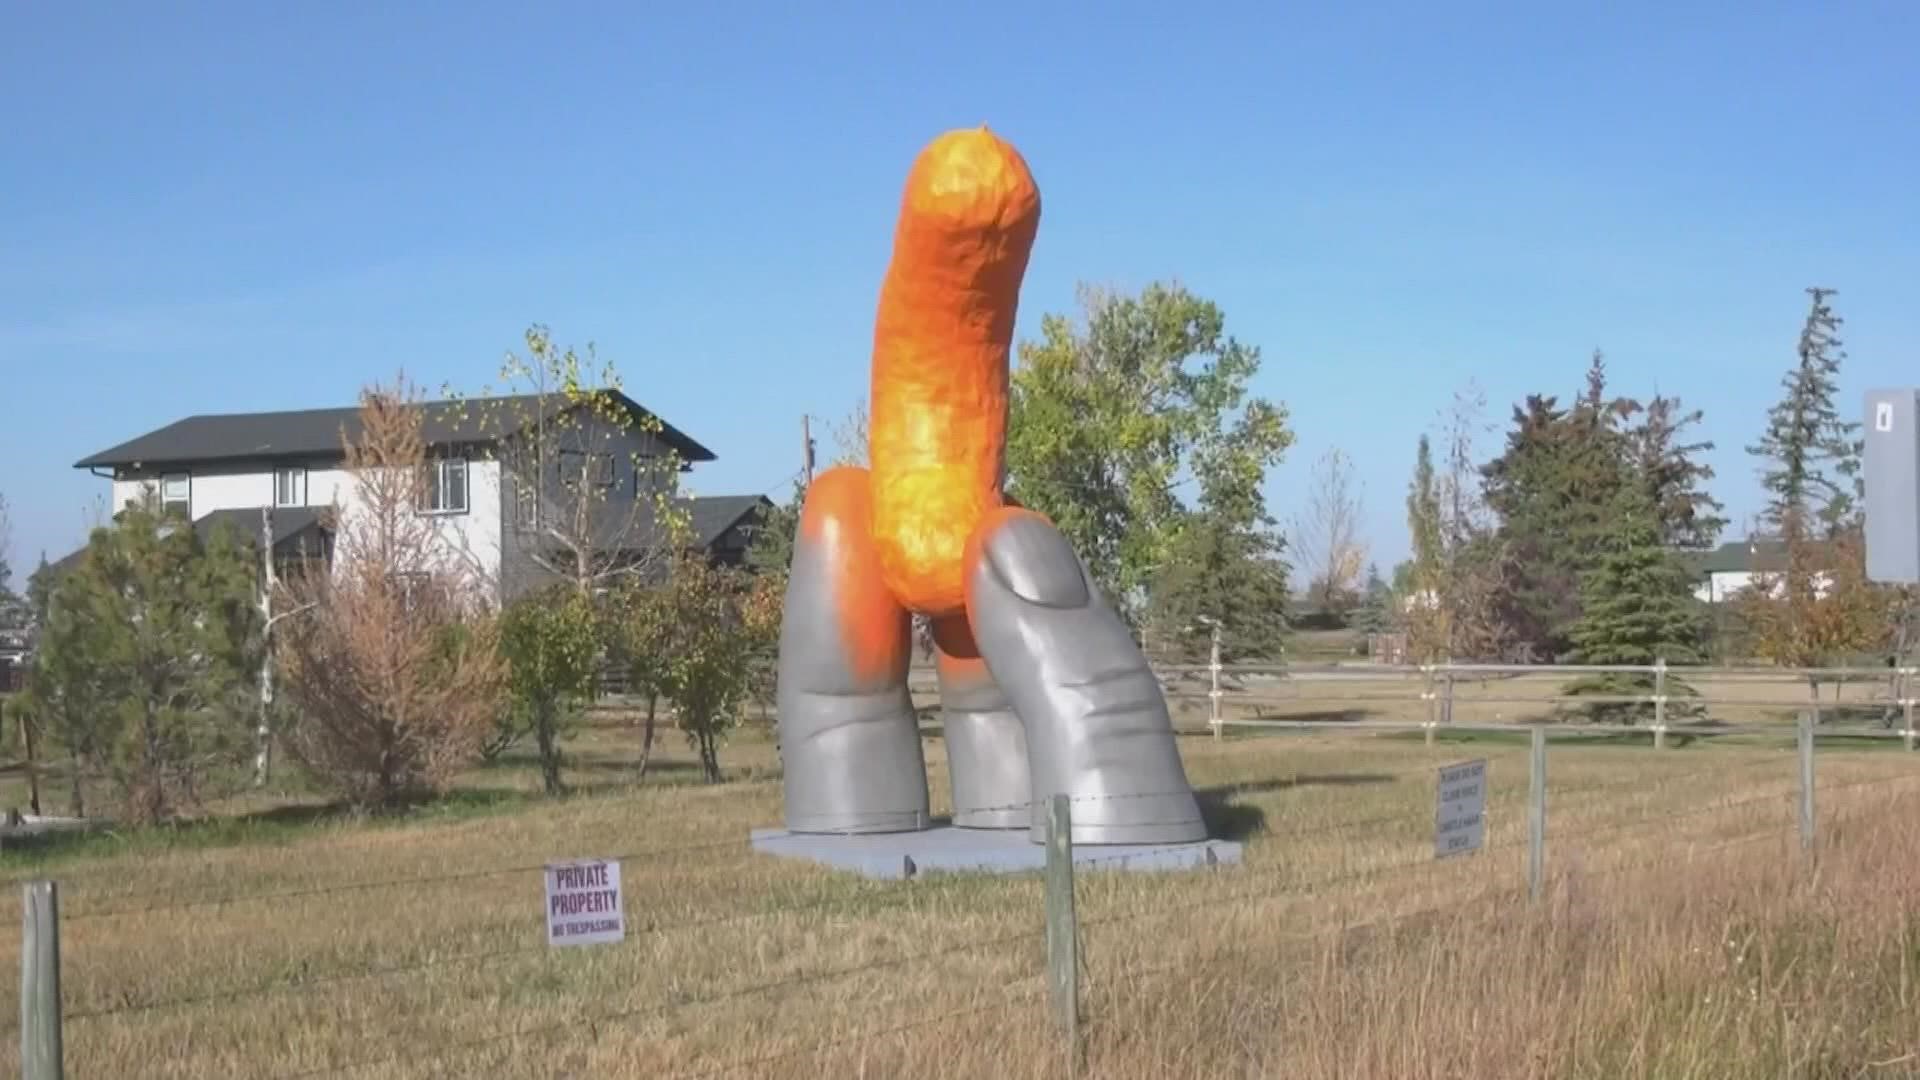 Cheetos installed a 17-foot-tall statue of a Cheeto-dust-covered